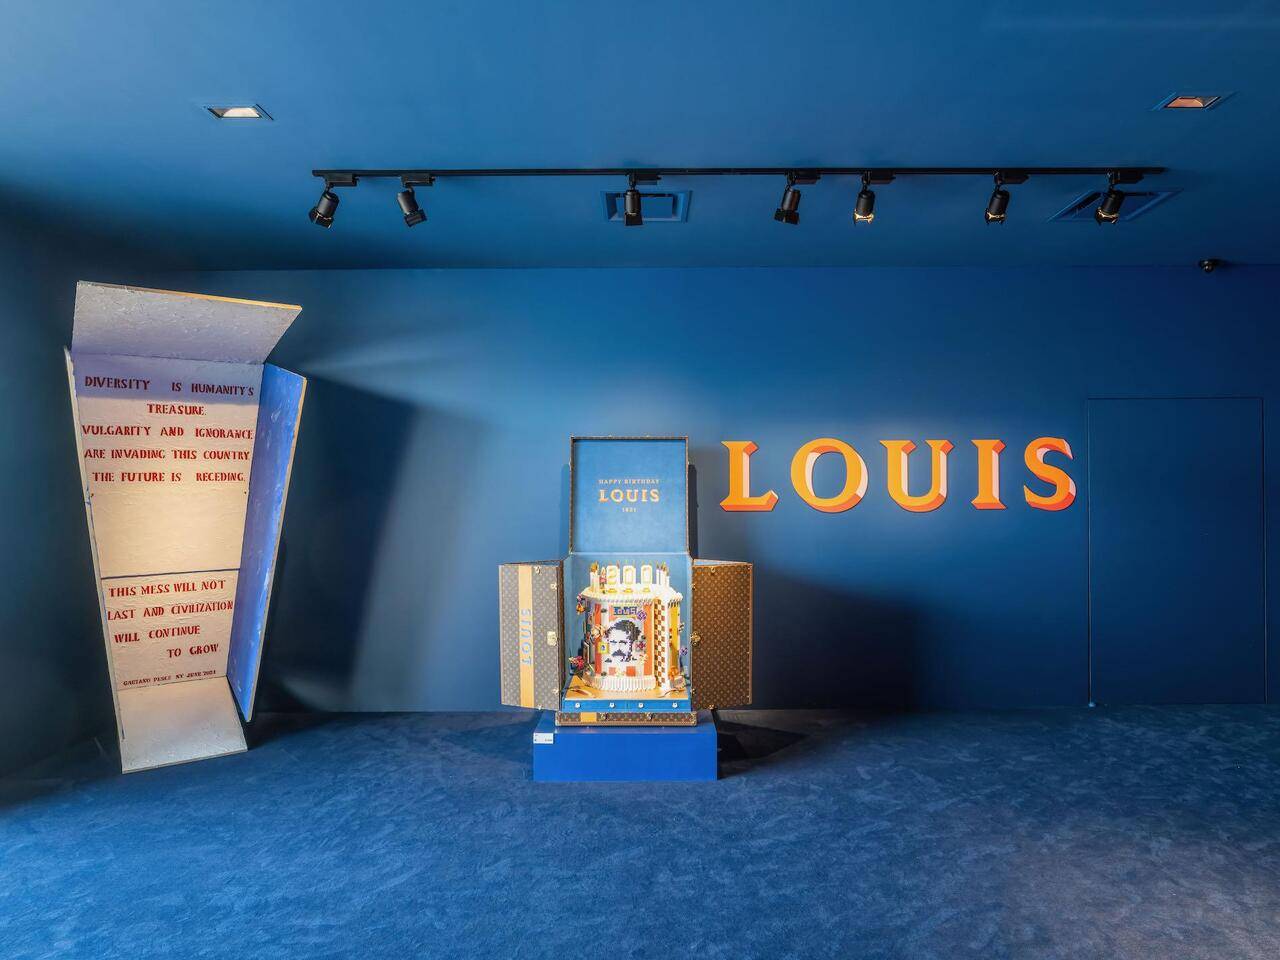 200 TRUNKS 200 VISIONARIES : THE EXHIBITION by Louis Vuitton in